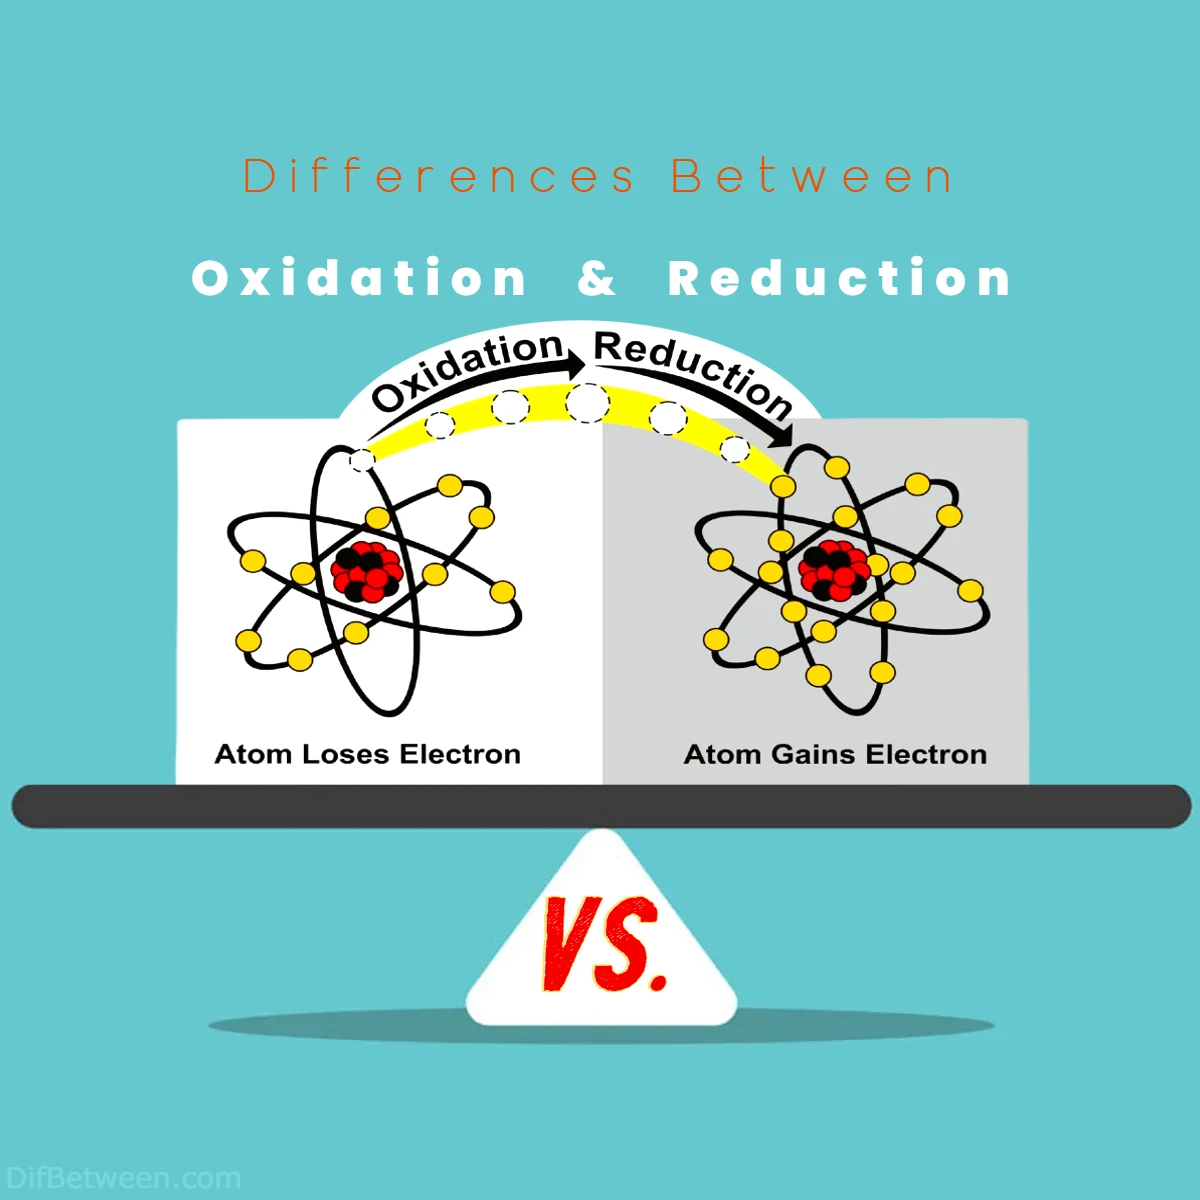 Differences Between Oxidation vs Reduction